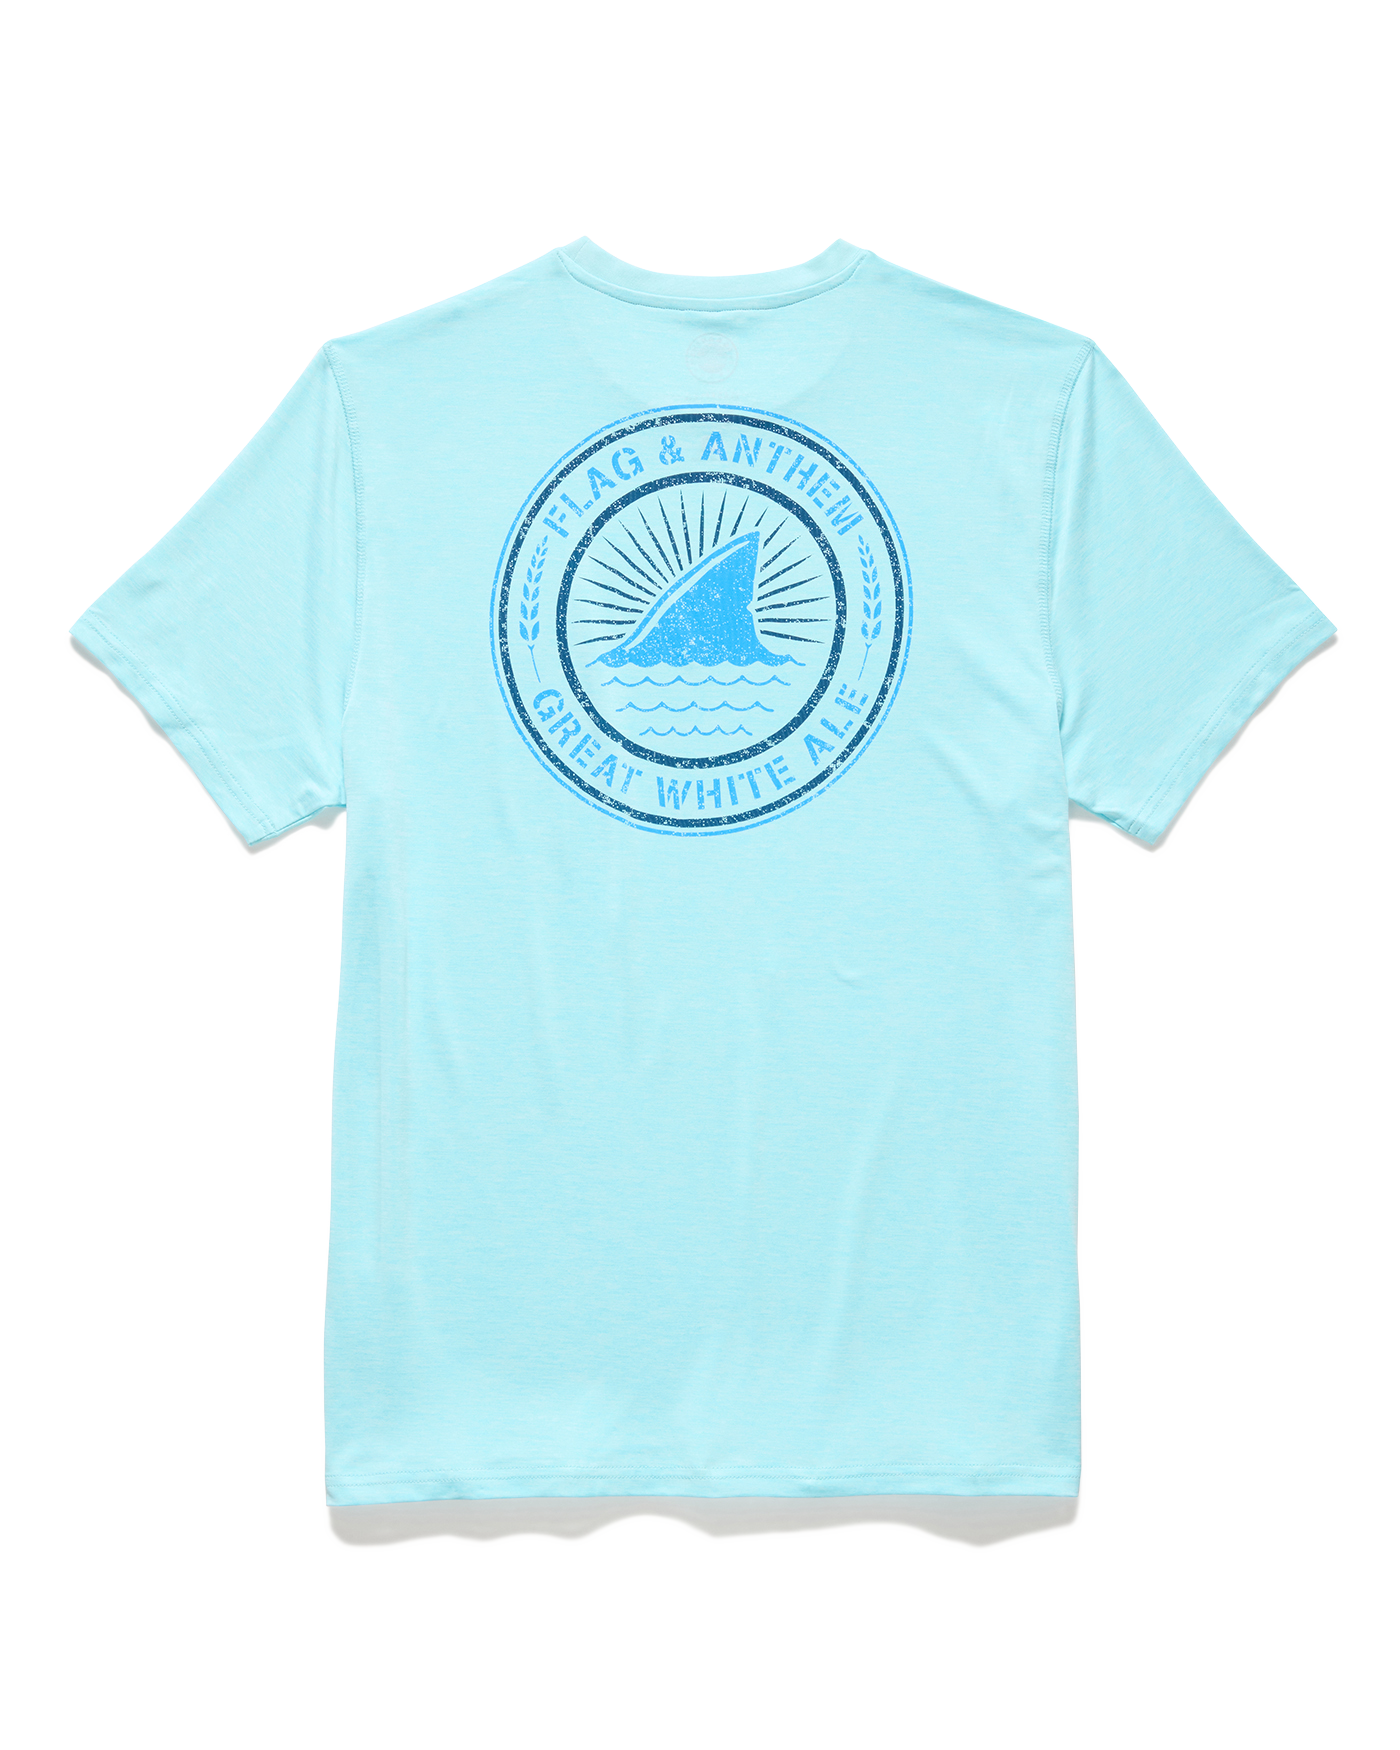 GREAT WHITE ALE PERFORMANCE TEE